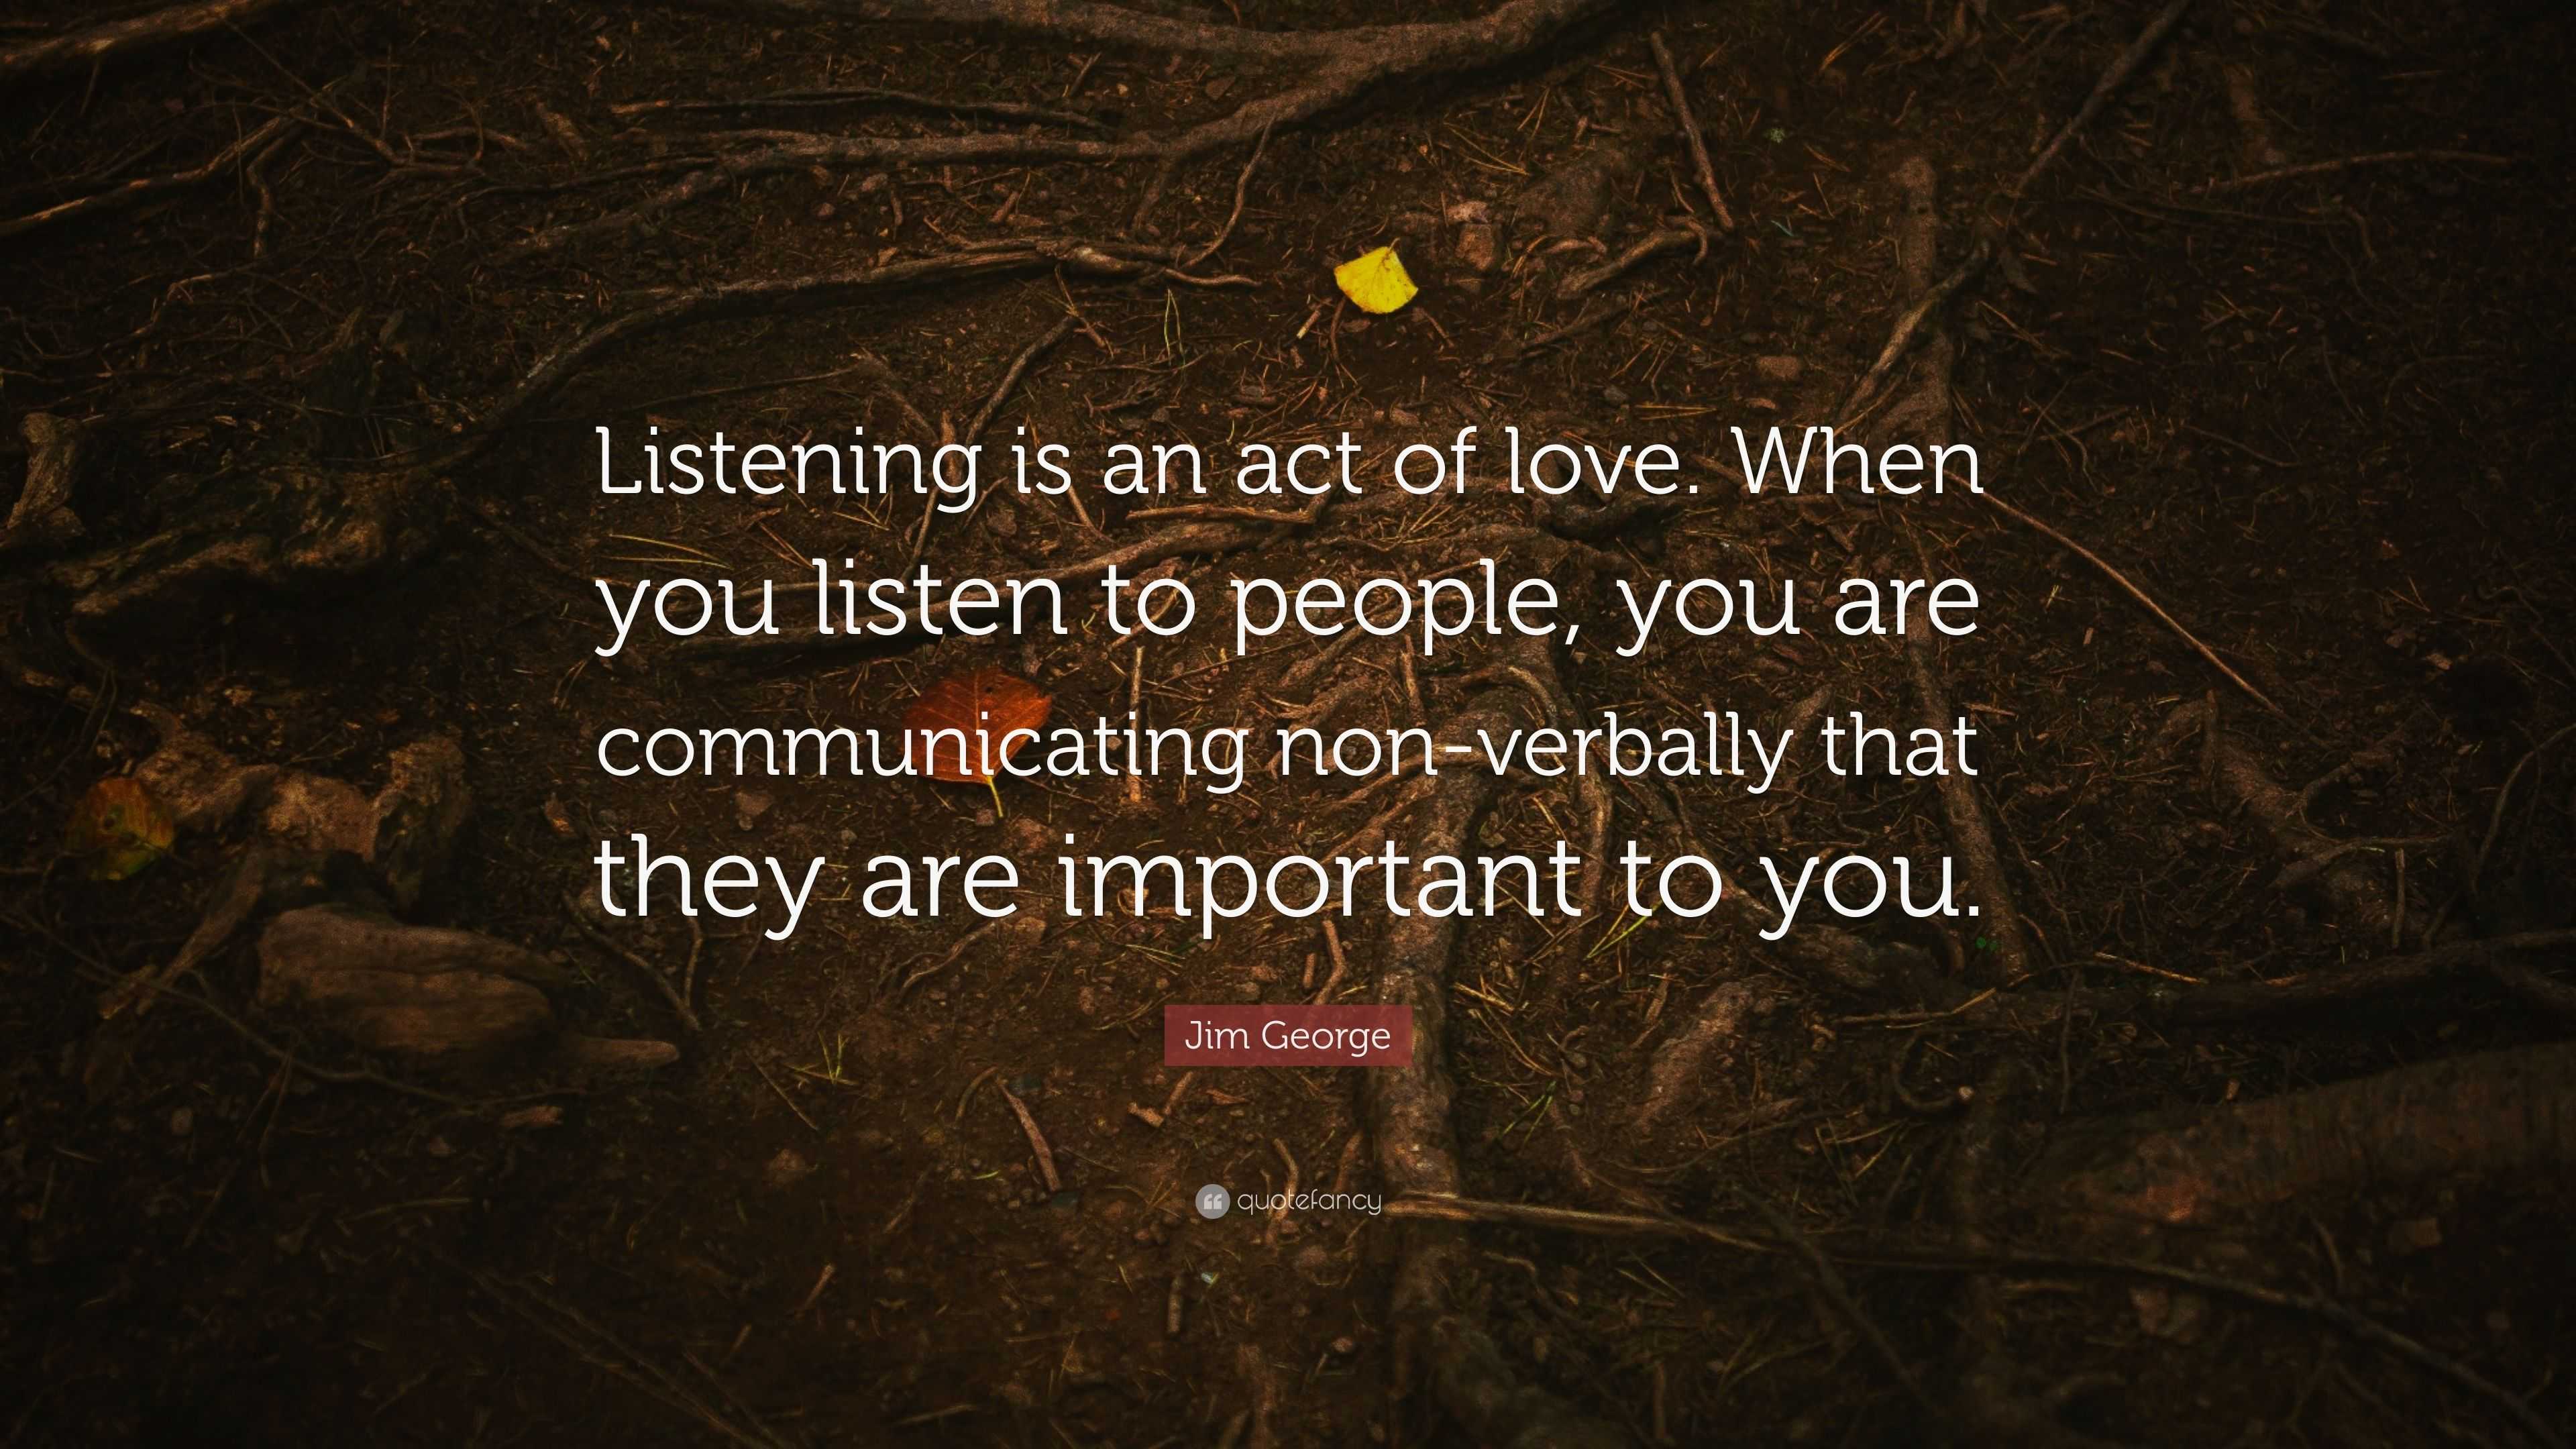 Jim George Quote: "Listening is an act of love. When you listen to people, you are communicating ...